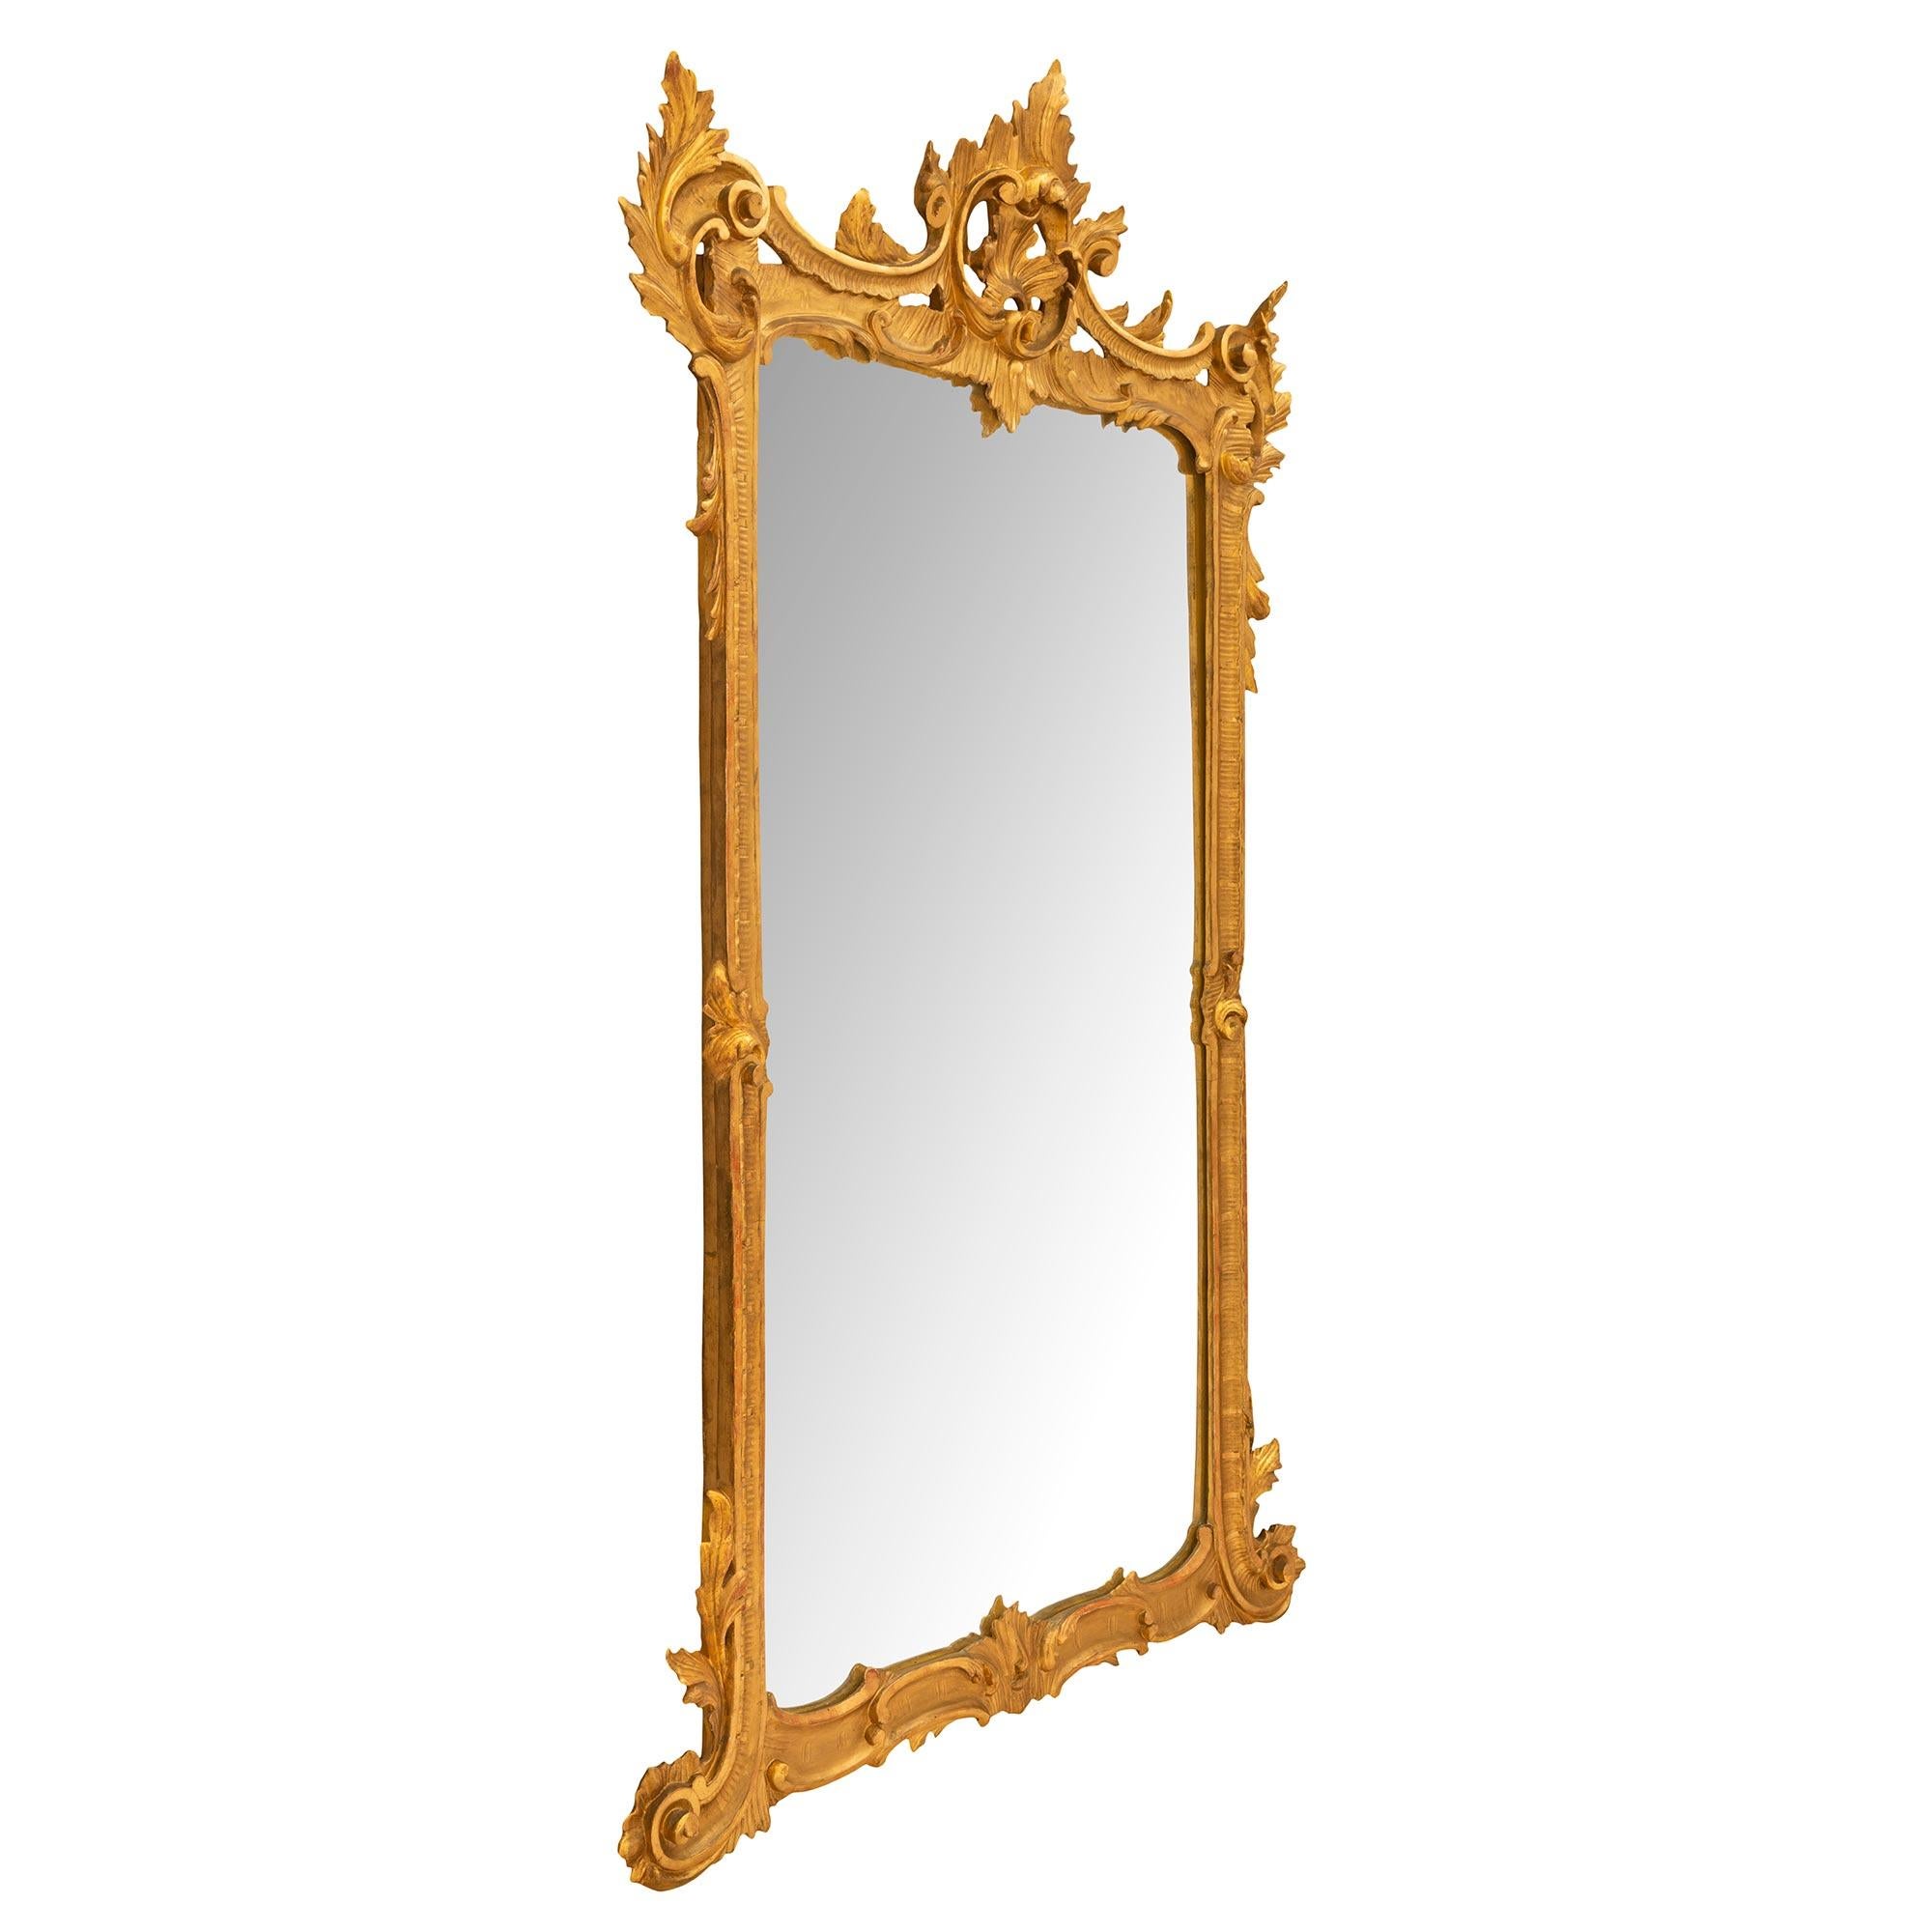 A wonderful Italian 19th century Louis XV st. giltwood mirror. The original mirror plate is framed within a striking and uniquely shaped giltwood reeded border with elegant C scrolled movements. At the bottom are rich acanthus leaf carvings and